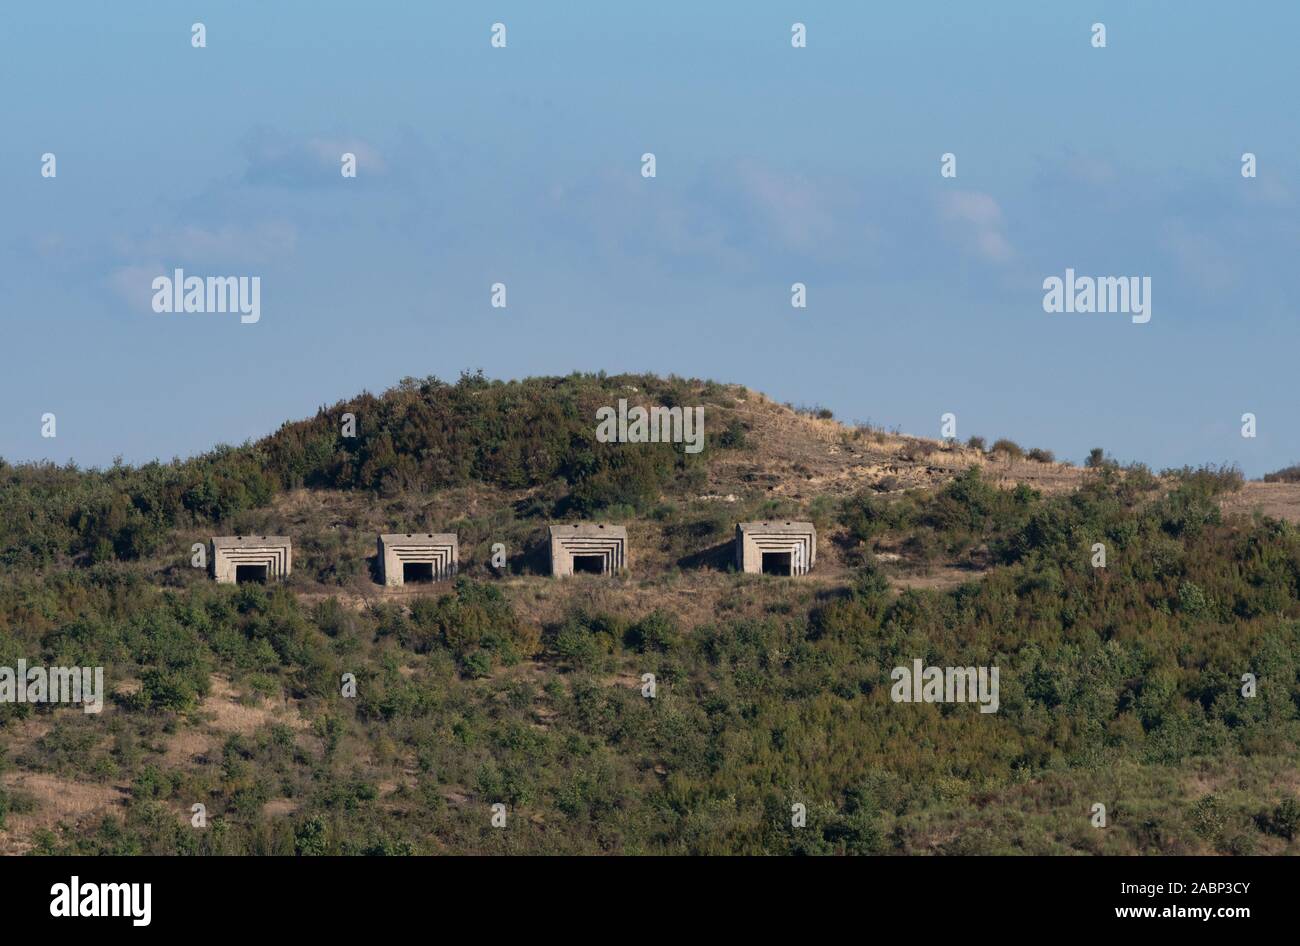 Four concrete bunkers built into a hill during Enver Hoxha's rule in the Soviet era in Albania. Stock Photo